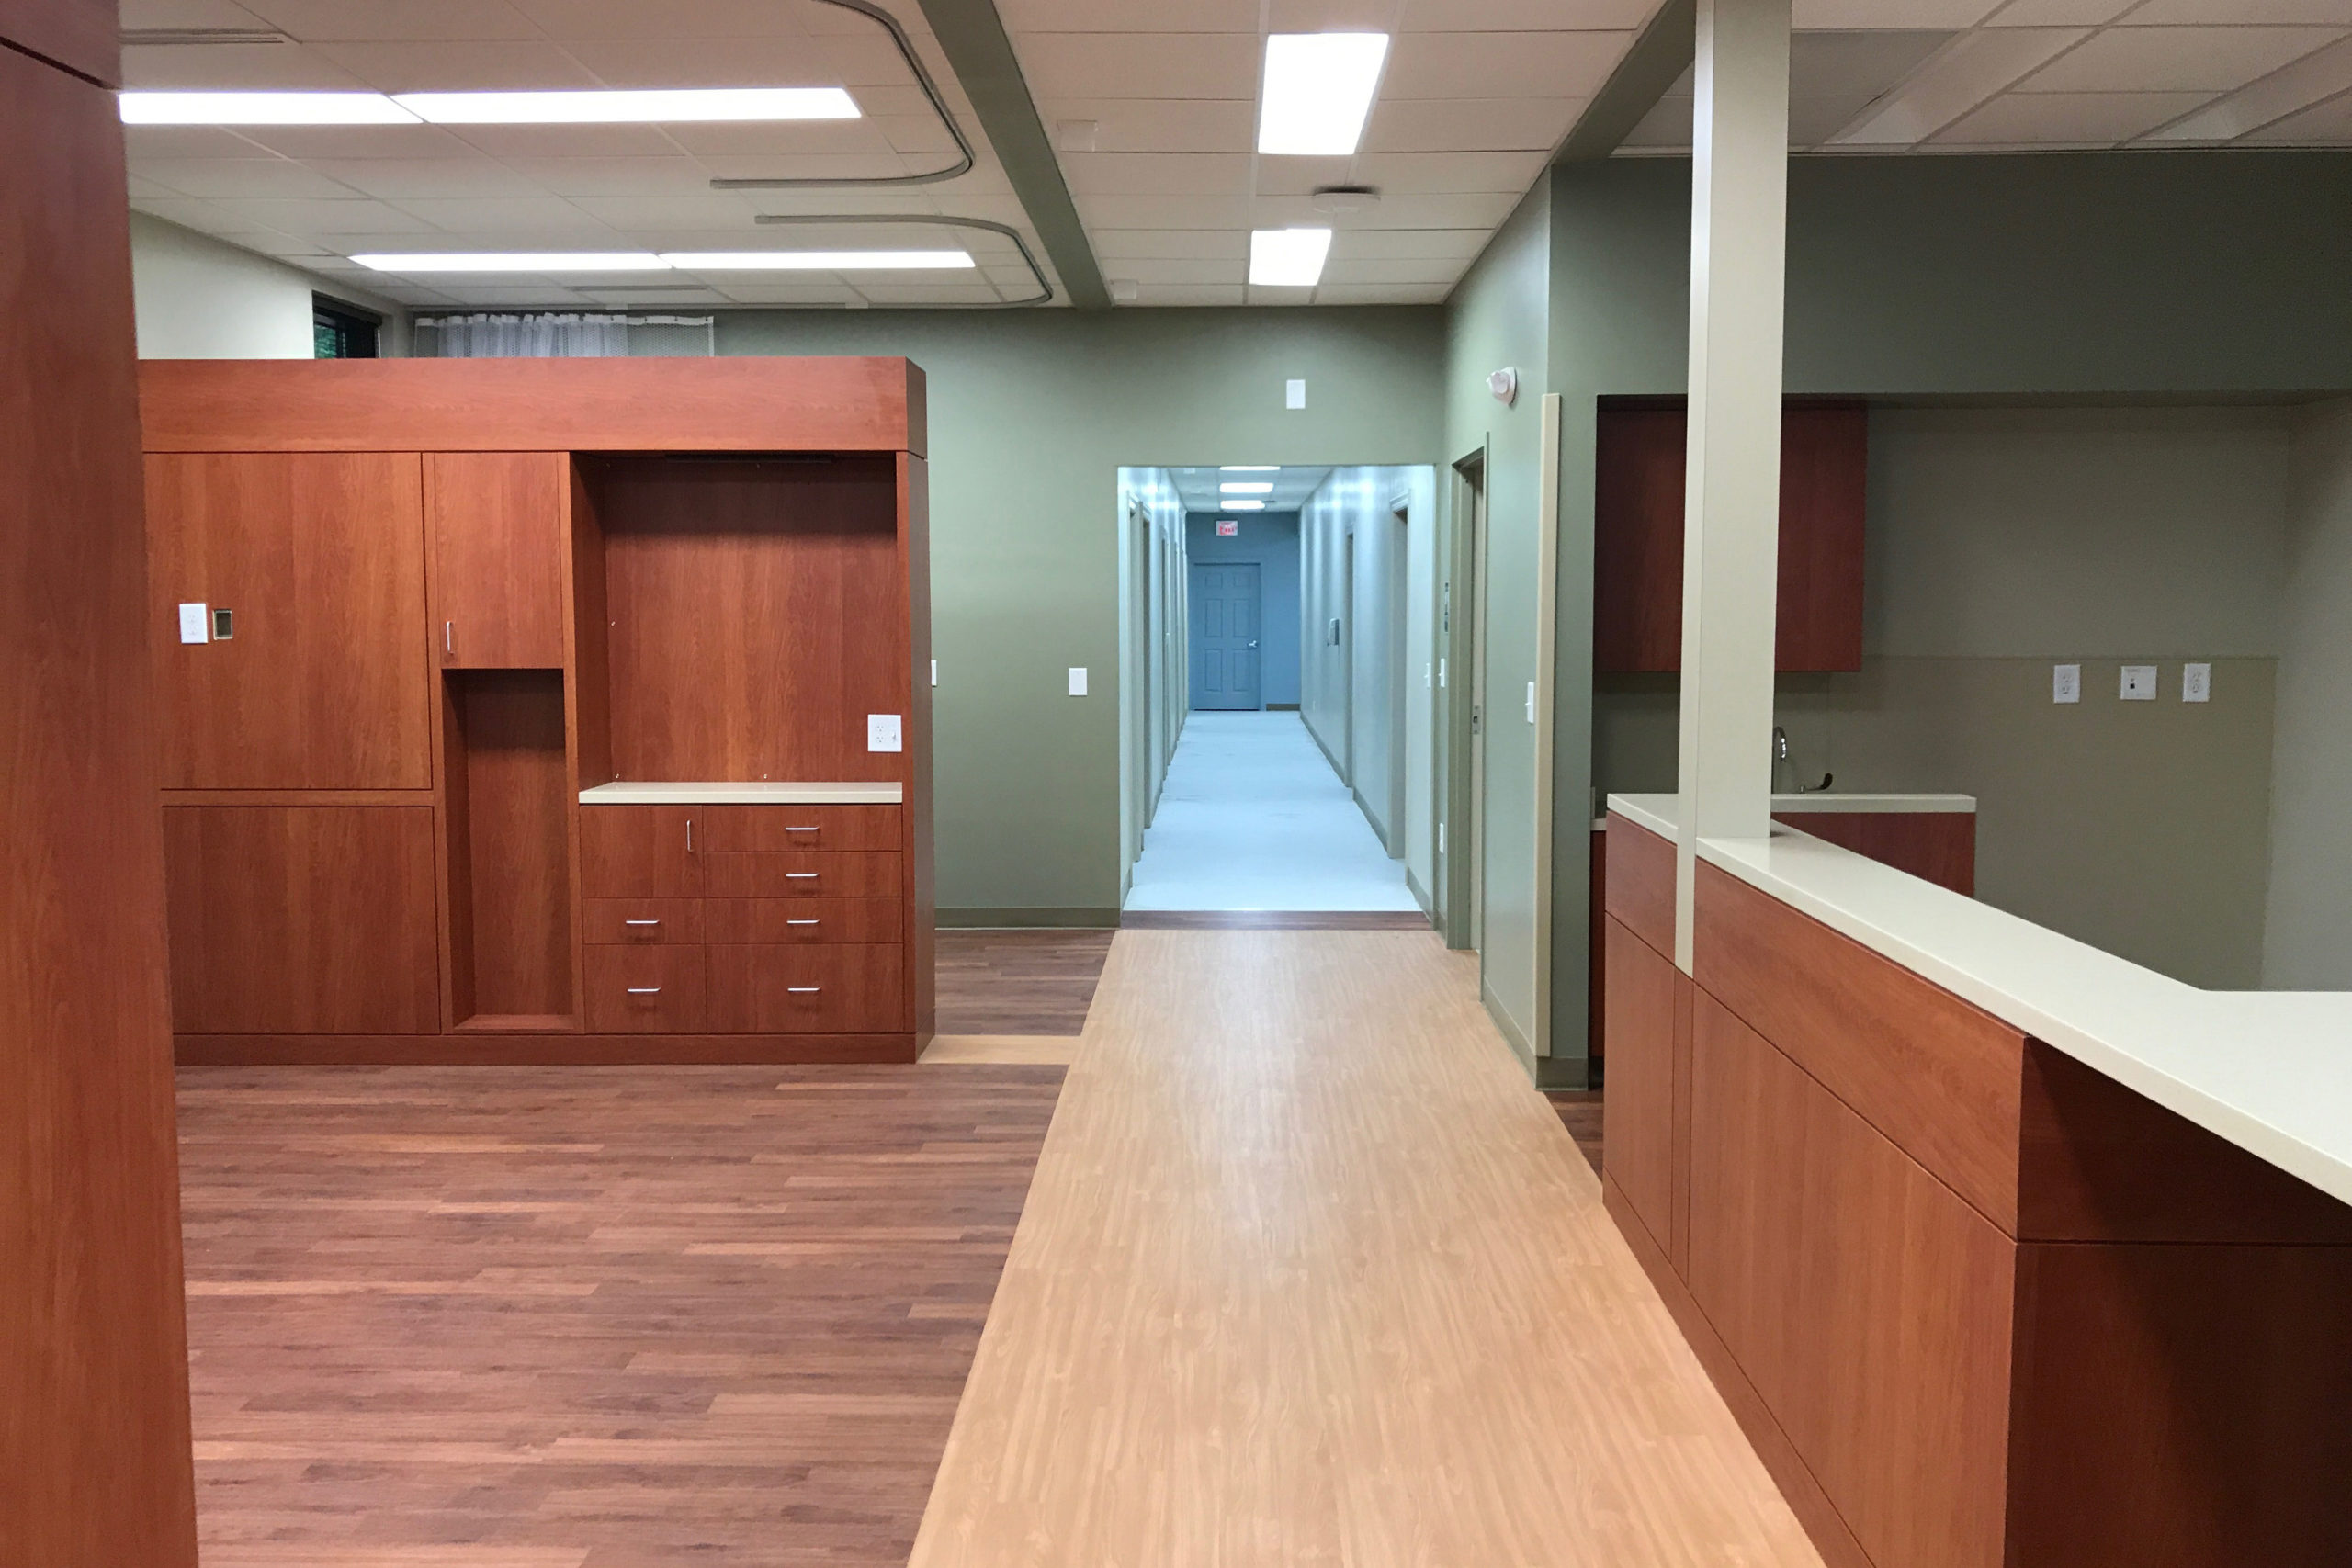 View of open bay infusion area.